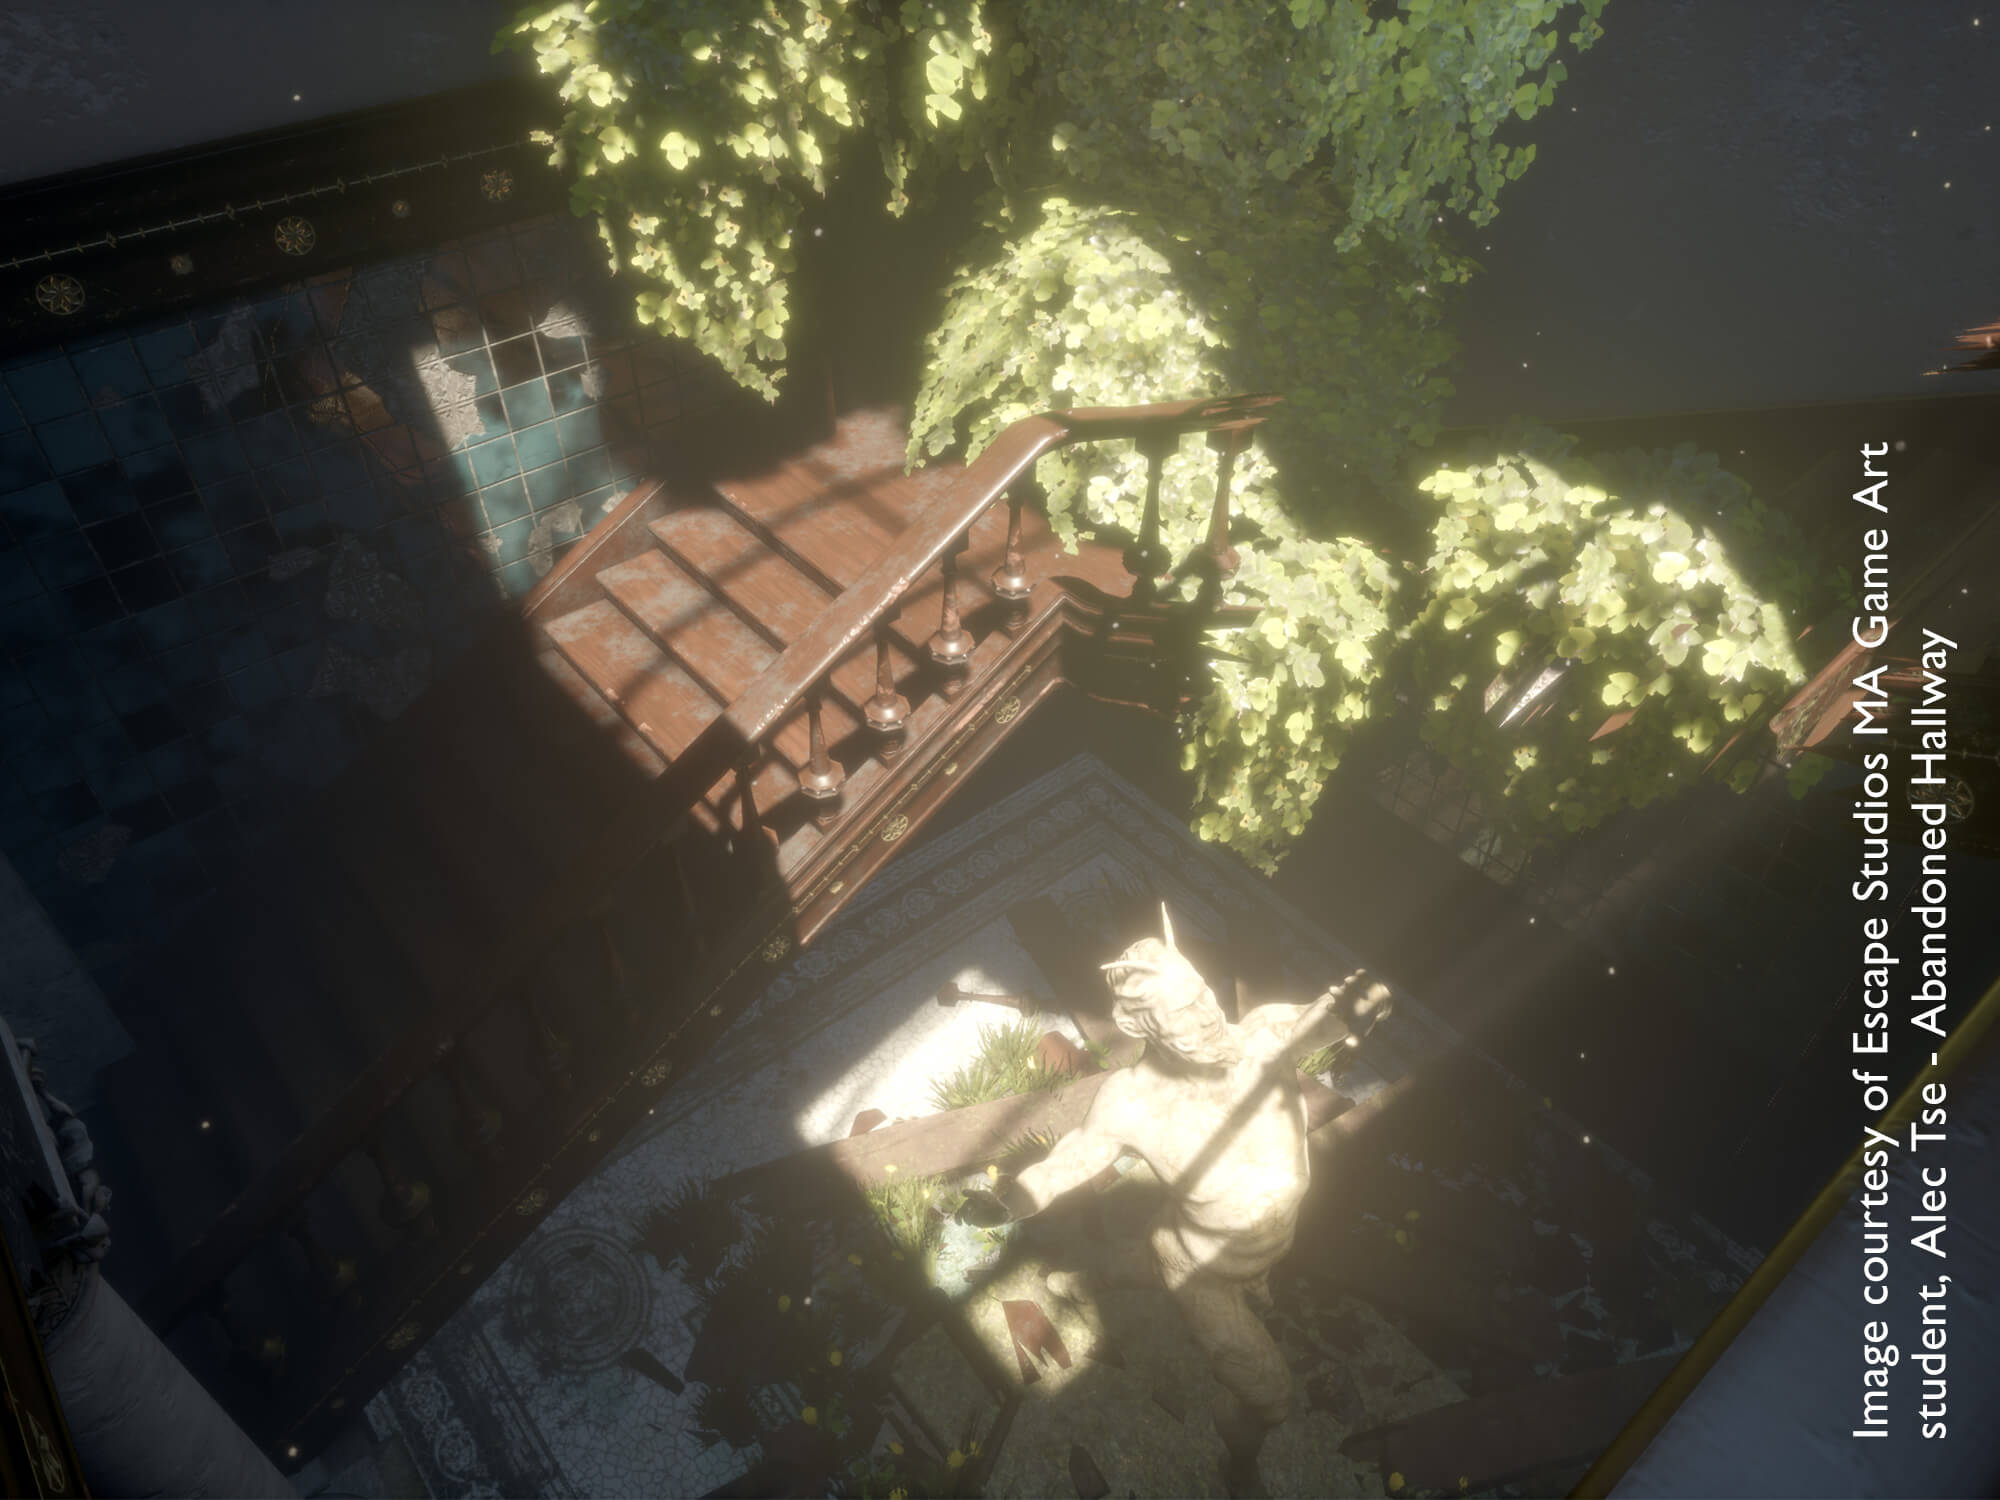 Video game environment scene of a house inner courtyard with stairs and statue invaded by leaves